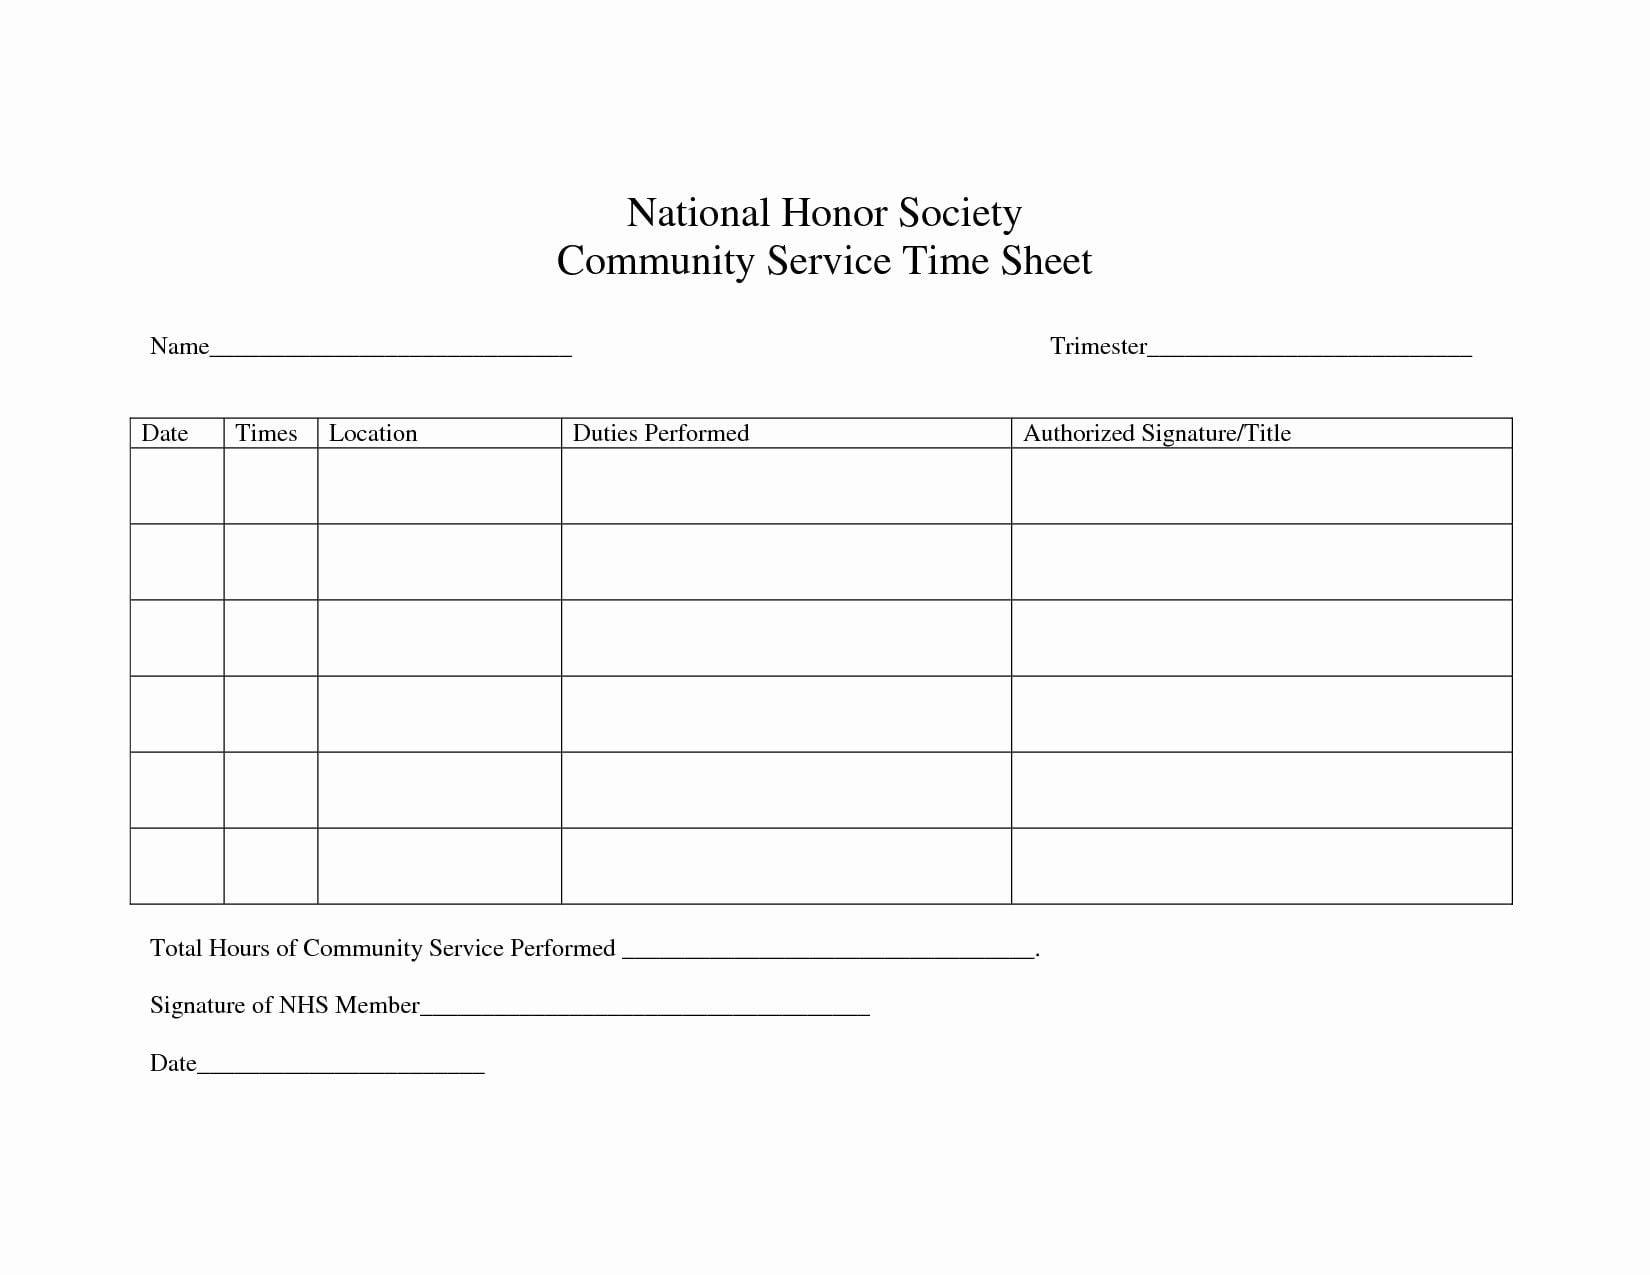 Community Service Hours Certificate Template Best Of Image Result For National Junior Honor National Honor Society Honor Society National Junior Honor Society